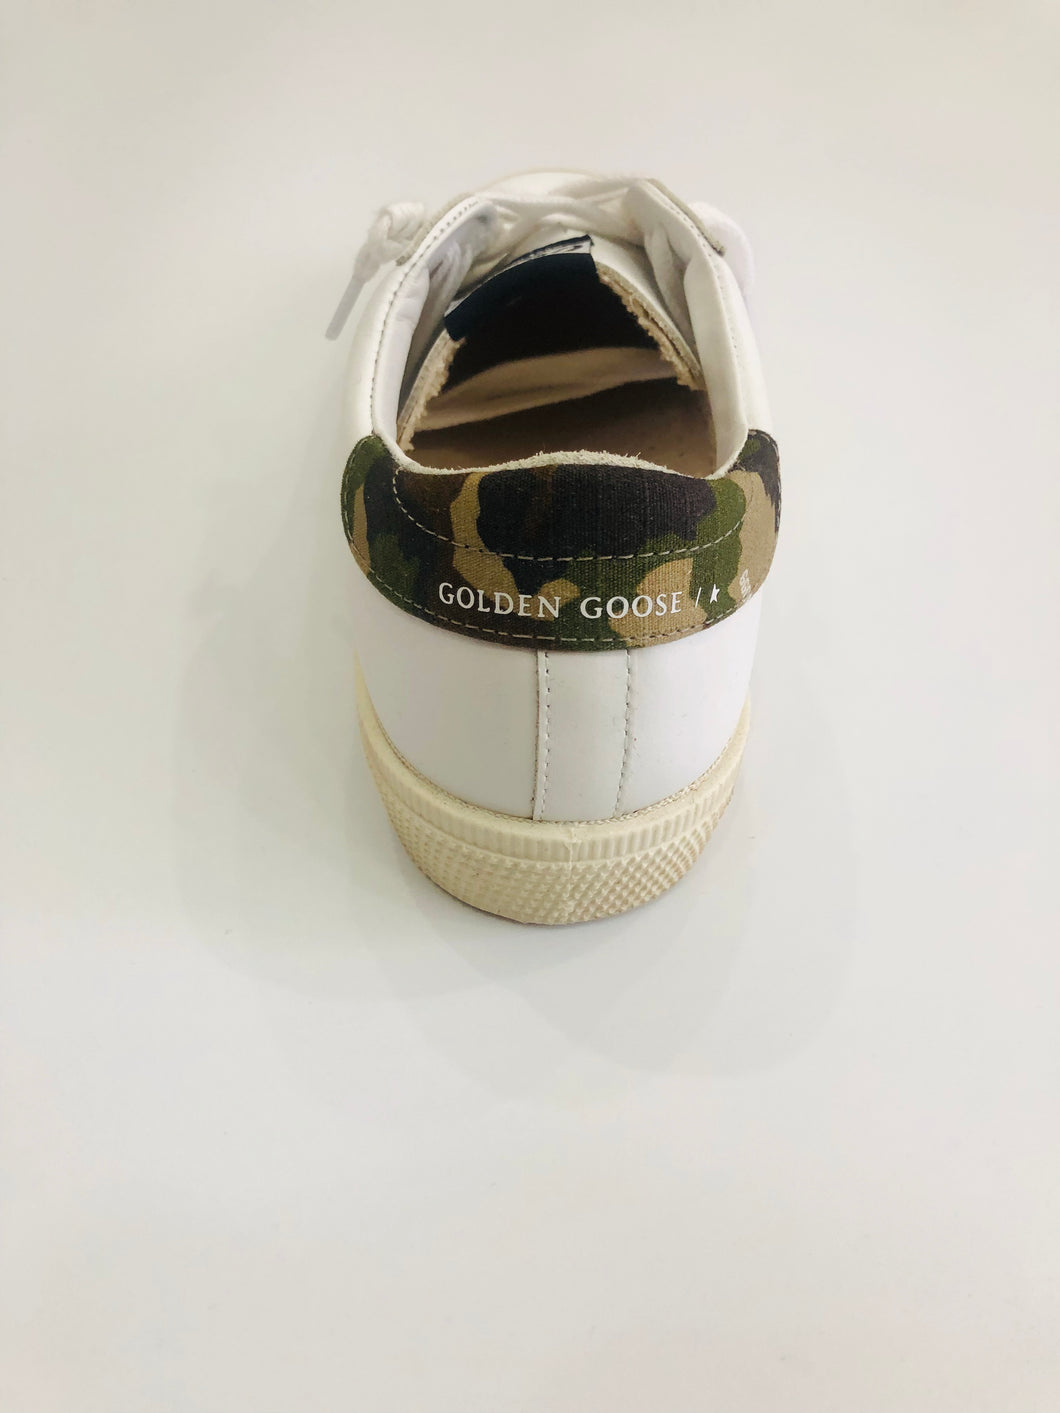 Golden Goose may jaune et camouflage taille 35